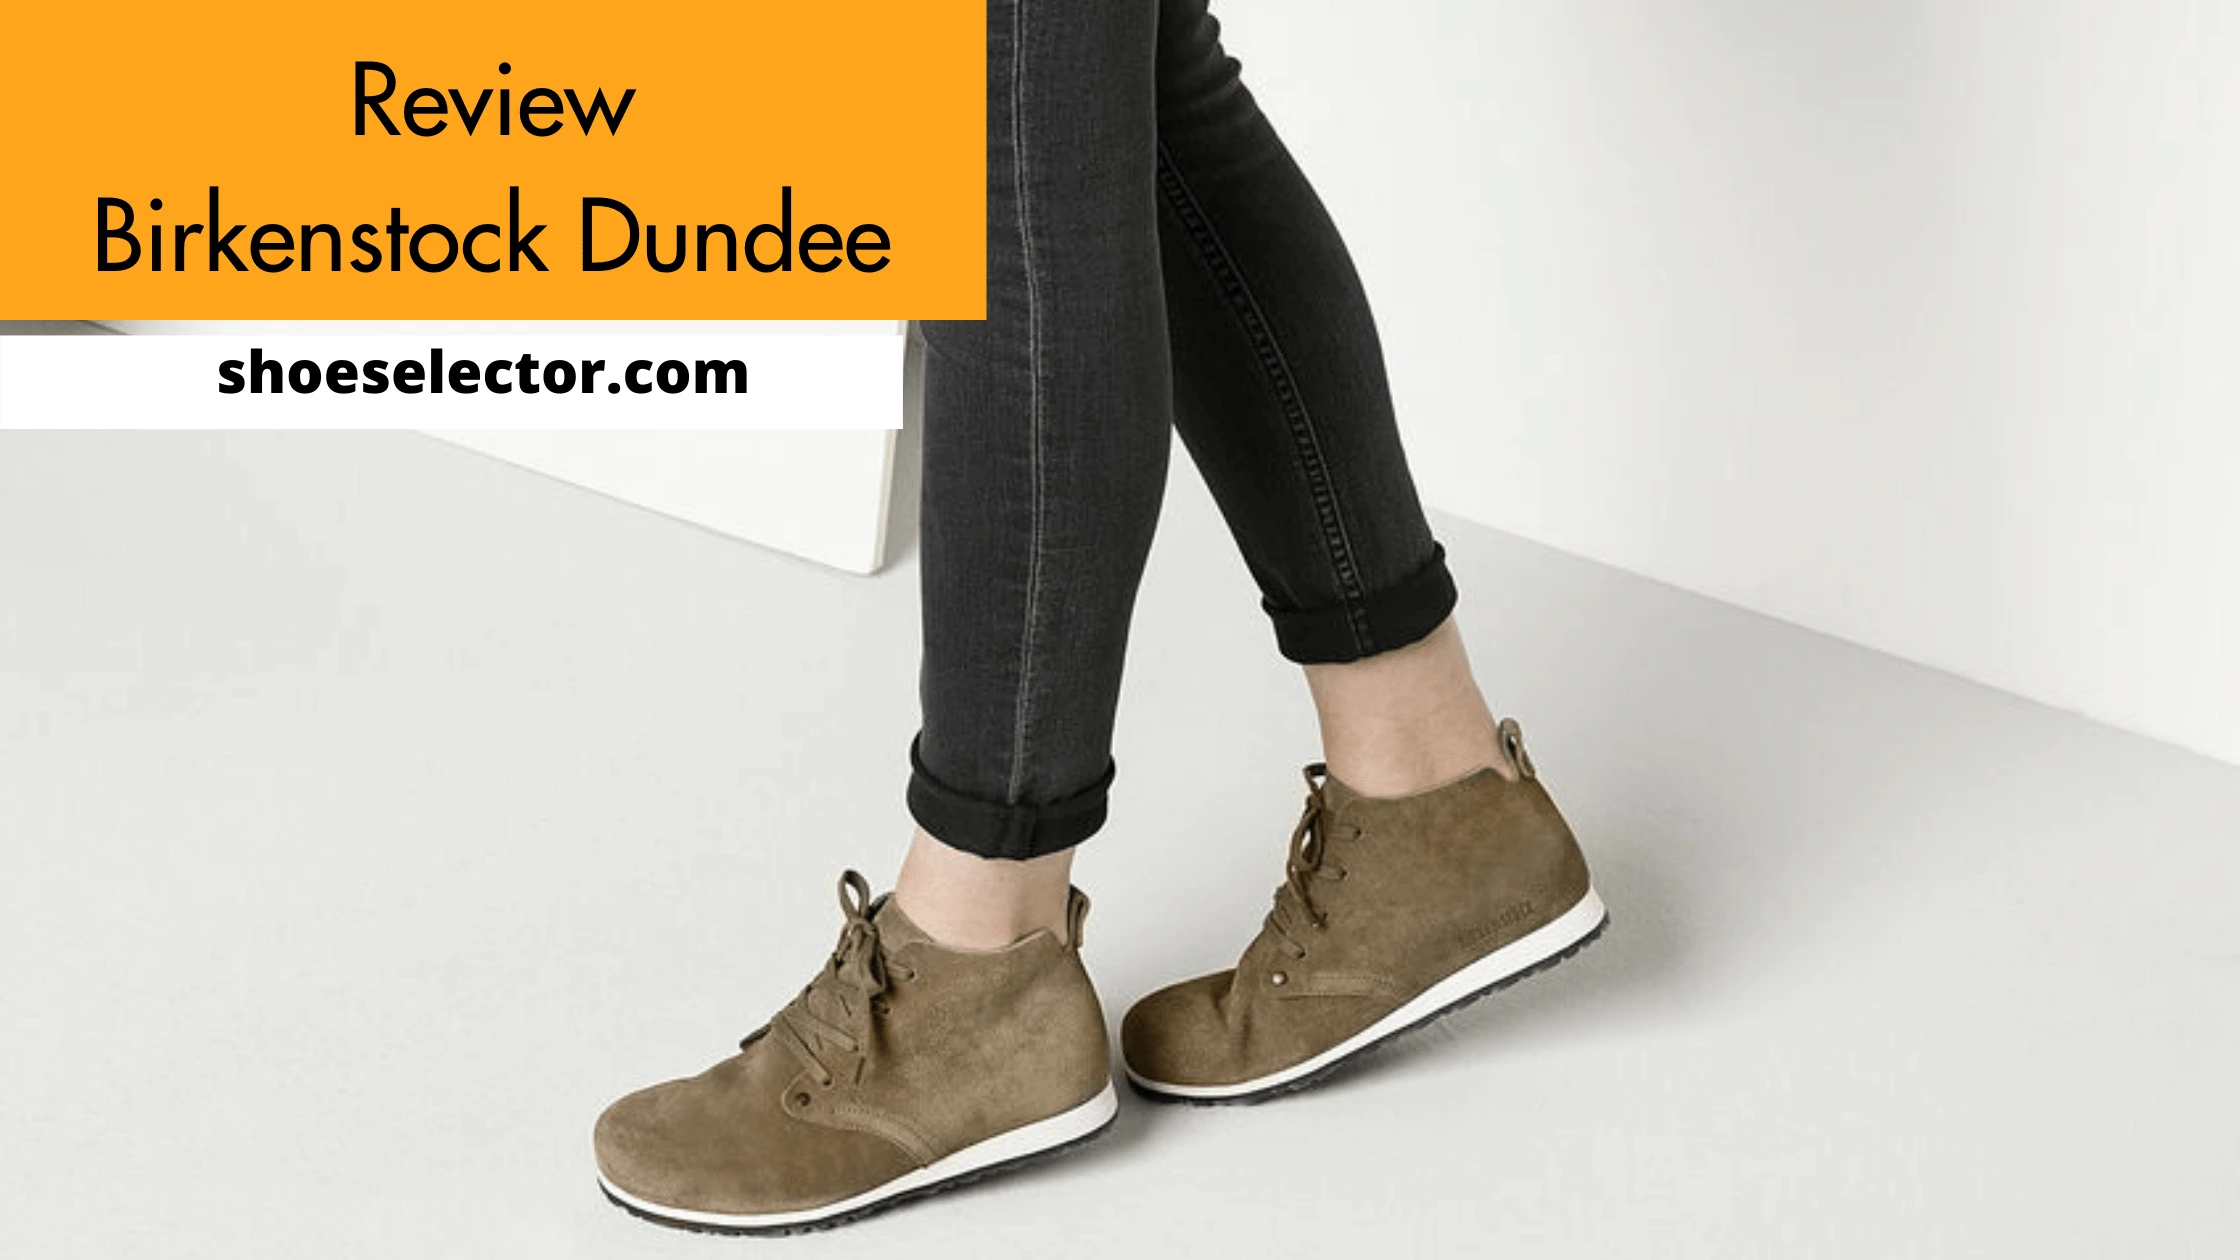 Birkenstock Dundee Review With Buying Guide